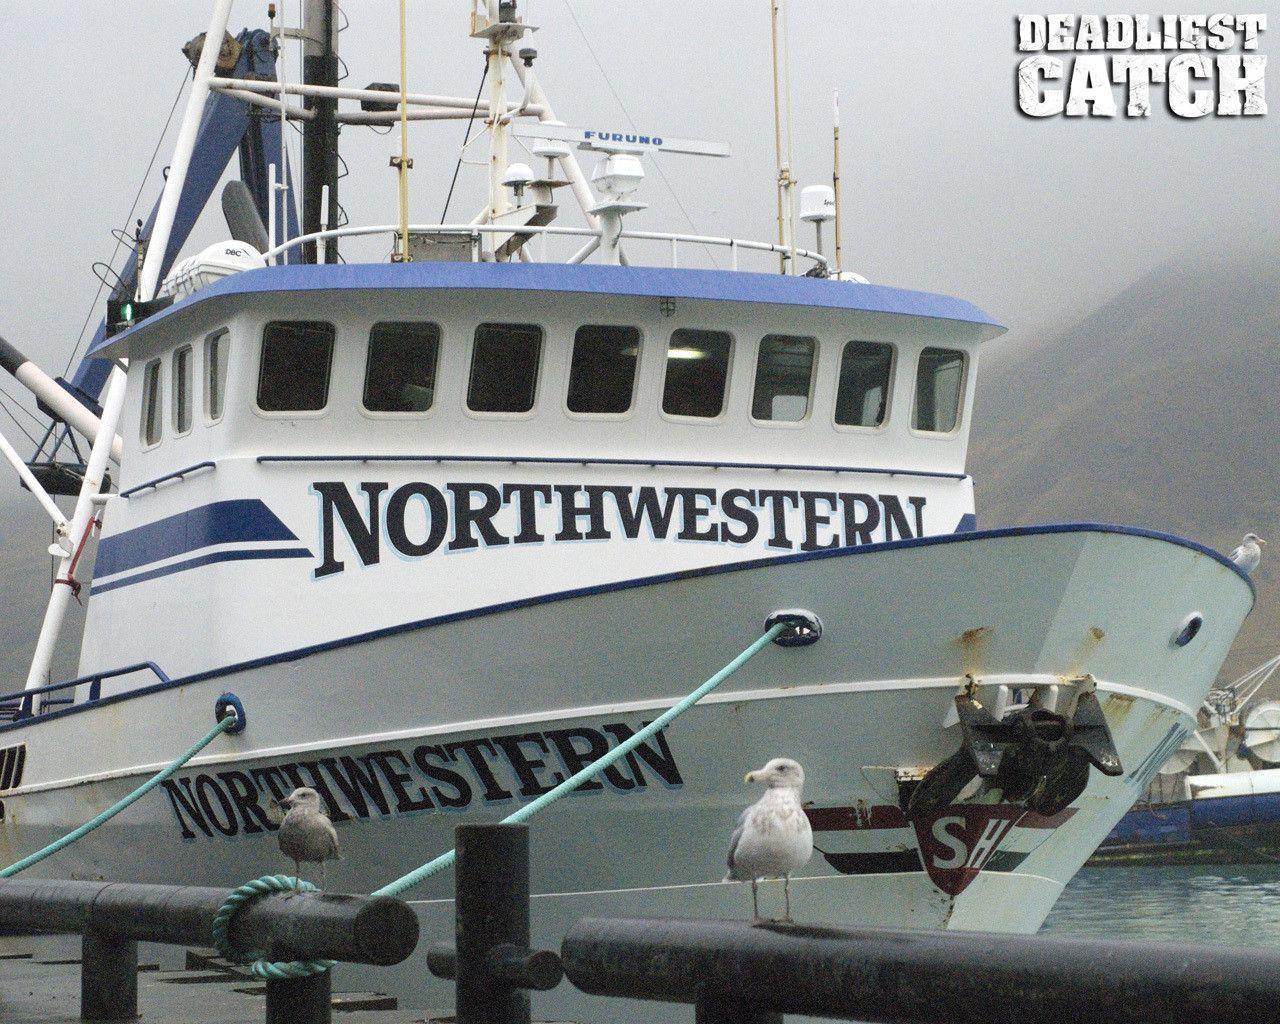 Deadliest Catch image Northwestern HD wallpaper and background